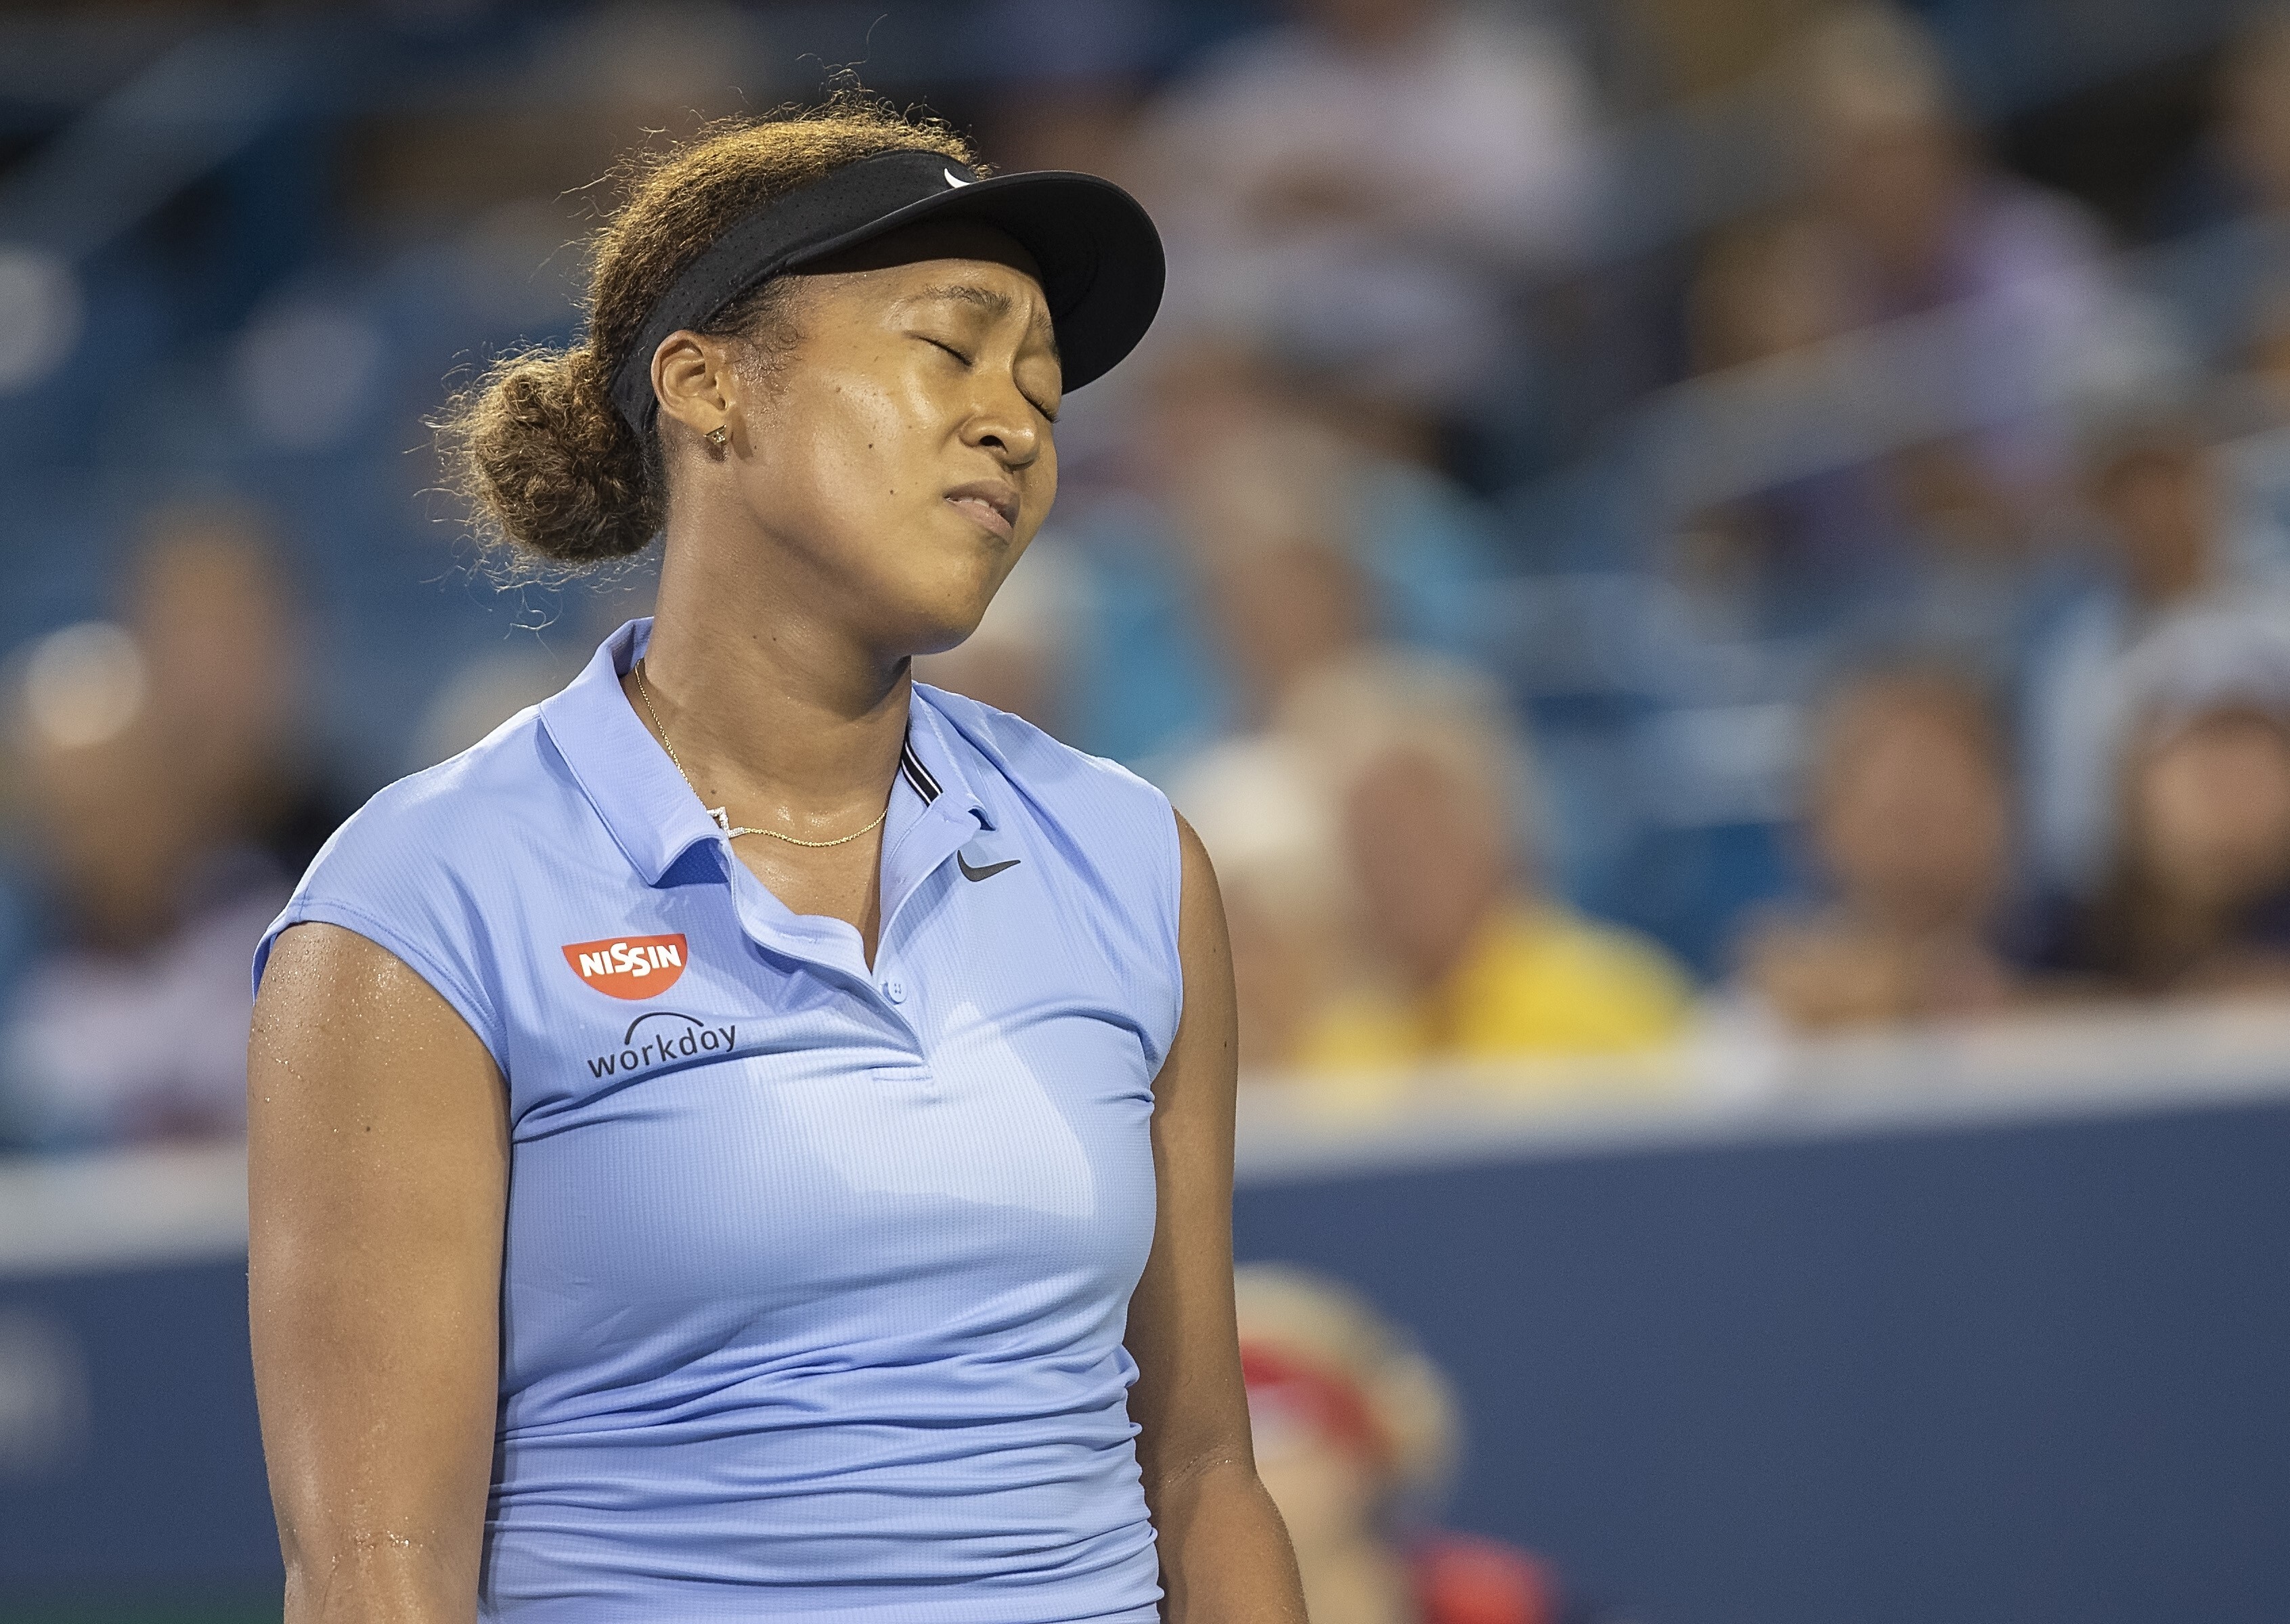 Naomi Osaka of Japan reacts during her match against Jil Teichmann of Switzerland during the Western and Southern Open at the Lindner Family Tennis Center in Mason, Ohio. Photos: USA Today Sports